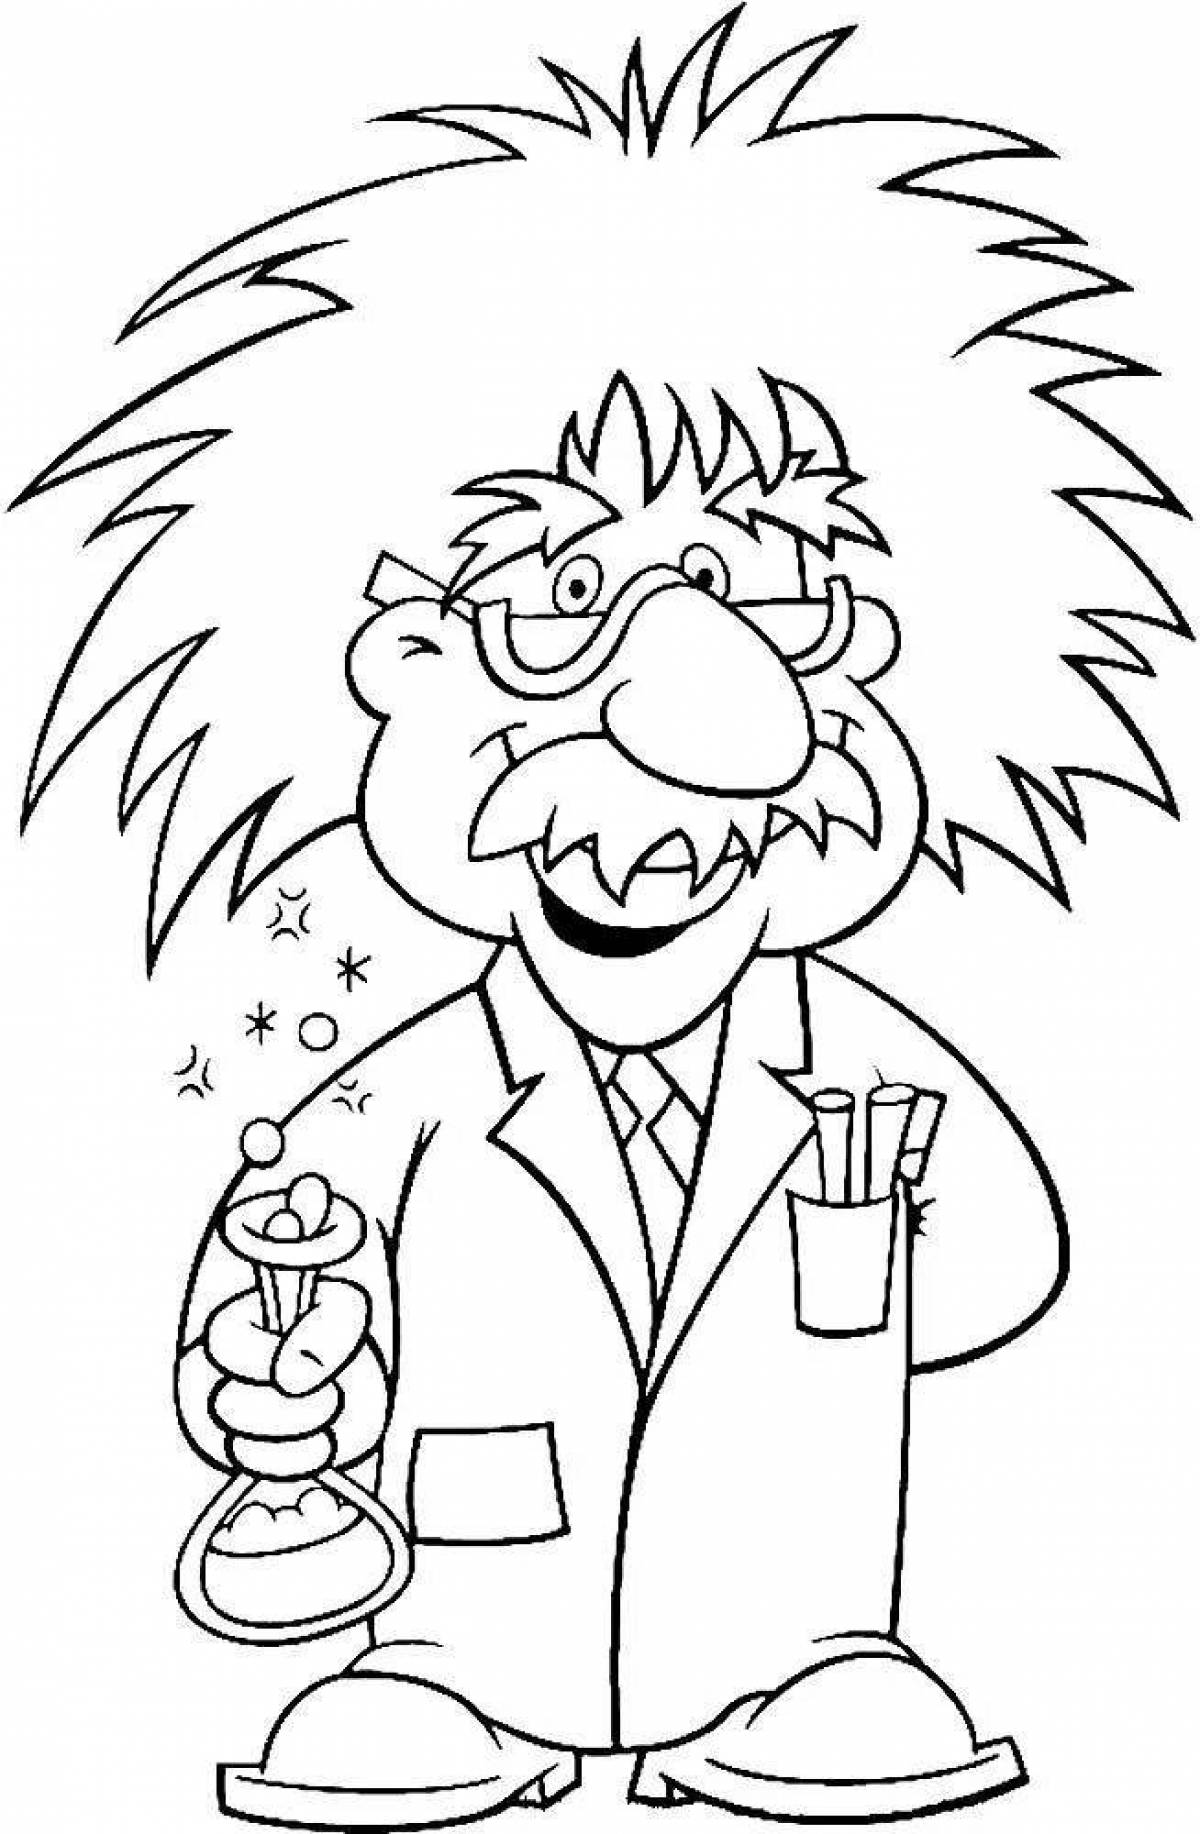 Playful science coloring page